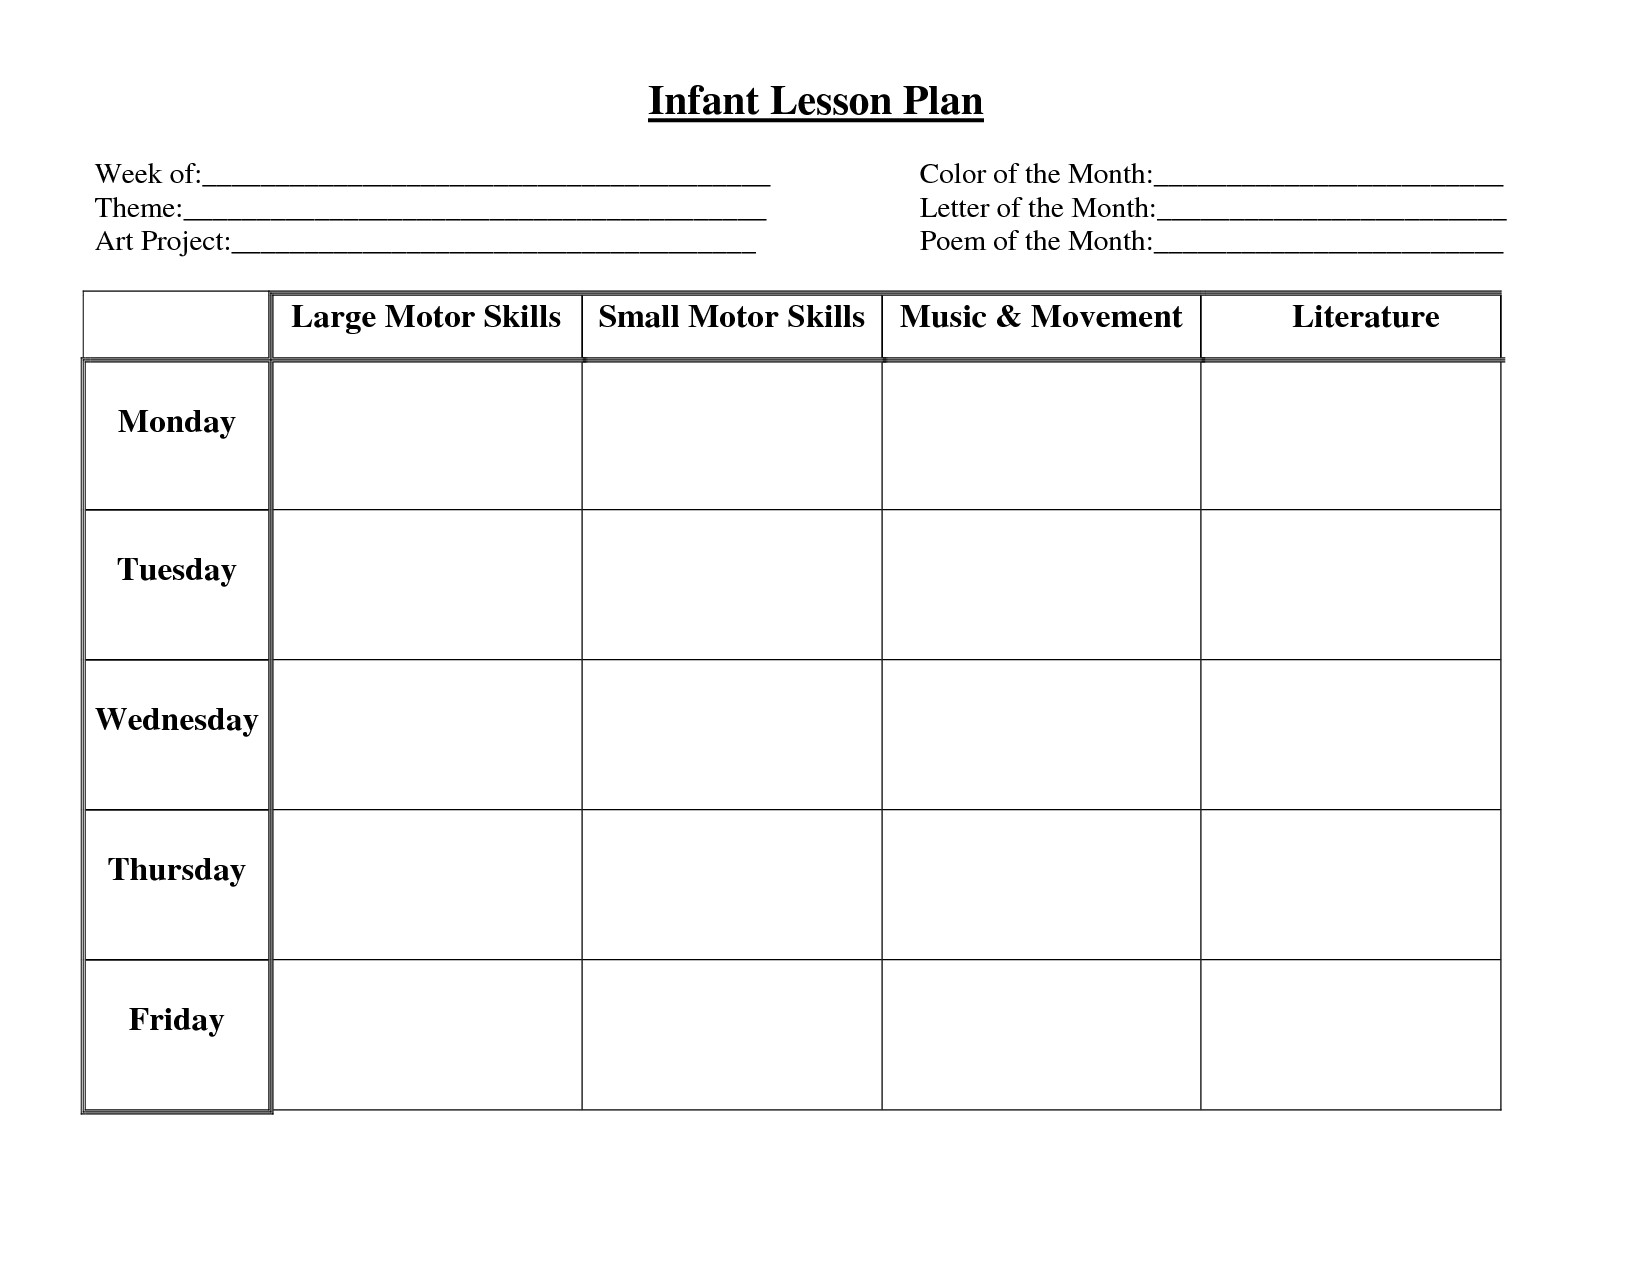 Blank Weekly Lesson Plan Template Infant Blank Lesson Plan Sheets